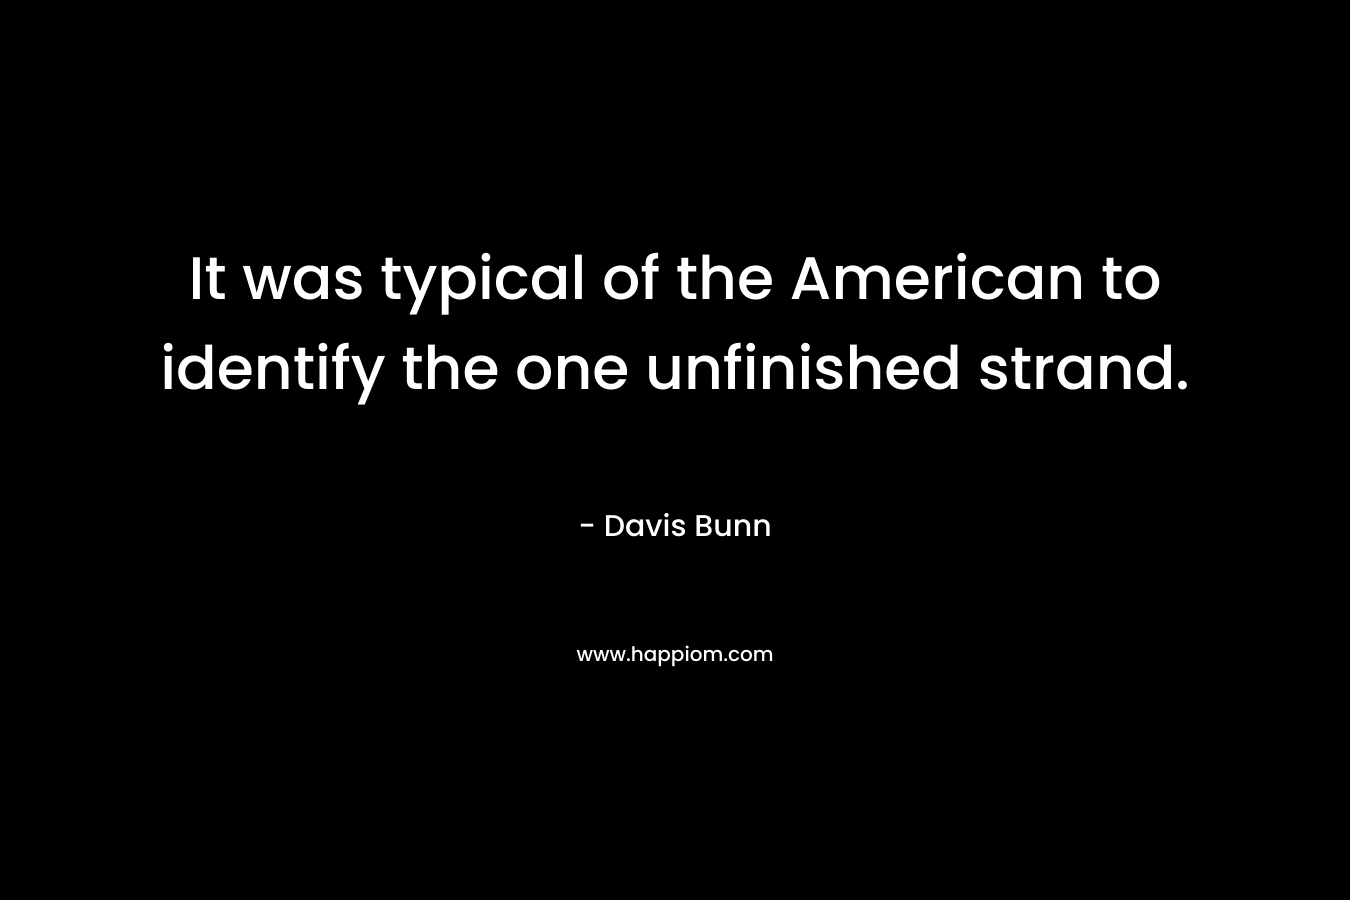 It was typical of the American to identify the one unfinished strand. – Davis Bunn